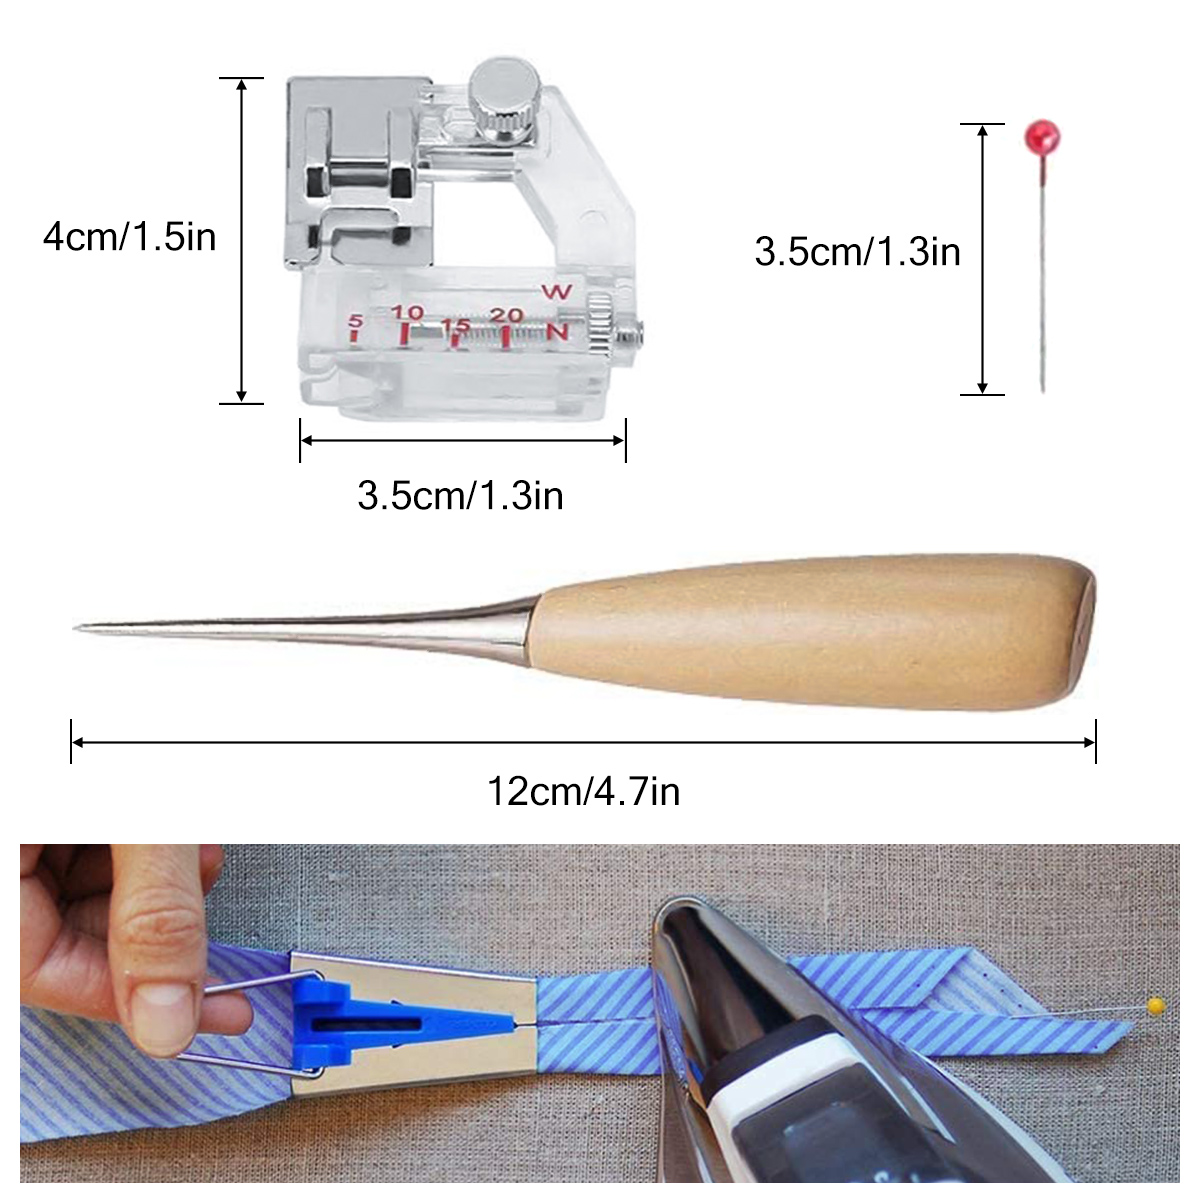 Sewing-Tape-Maker-Kits-4-Sizes-6MM-12MM-18MM-25MM-Household-DIY-Fabric-Patchwork-Sewing-Accessories--1707094-10